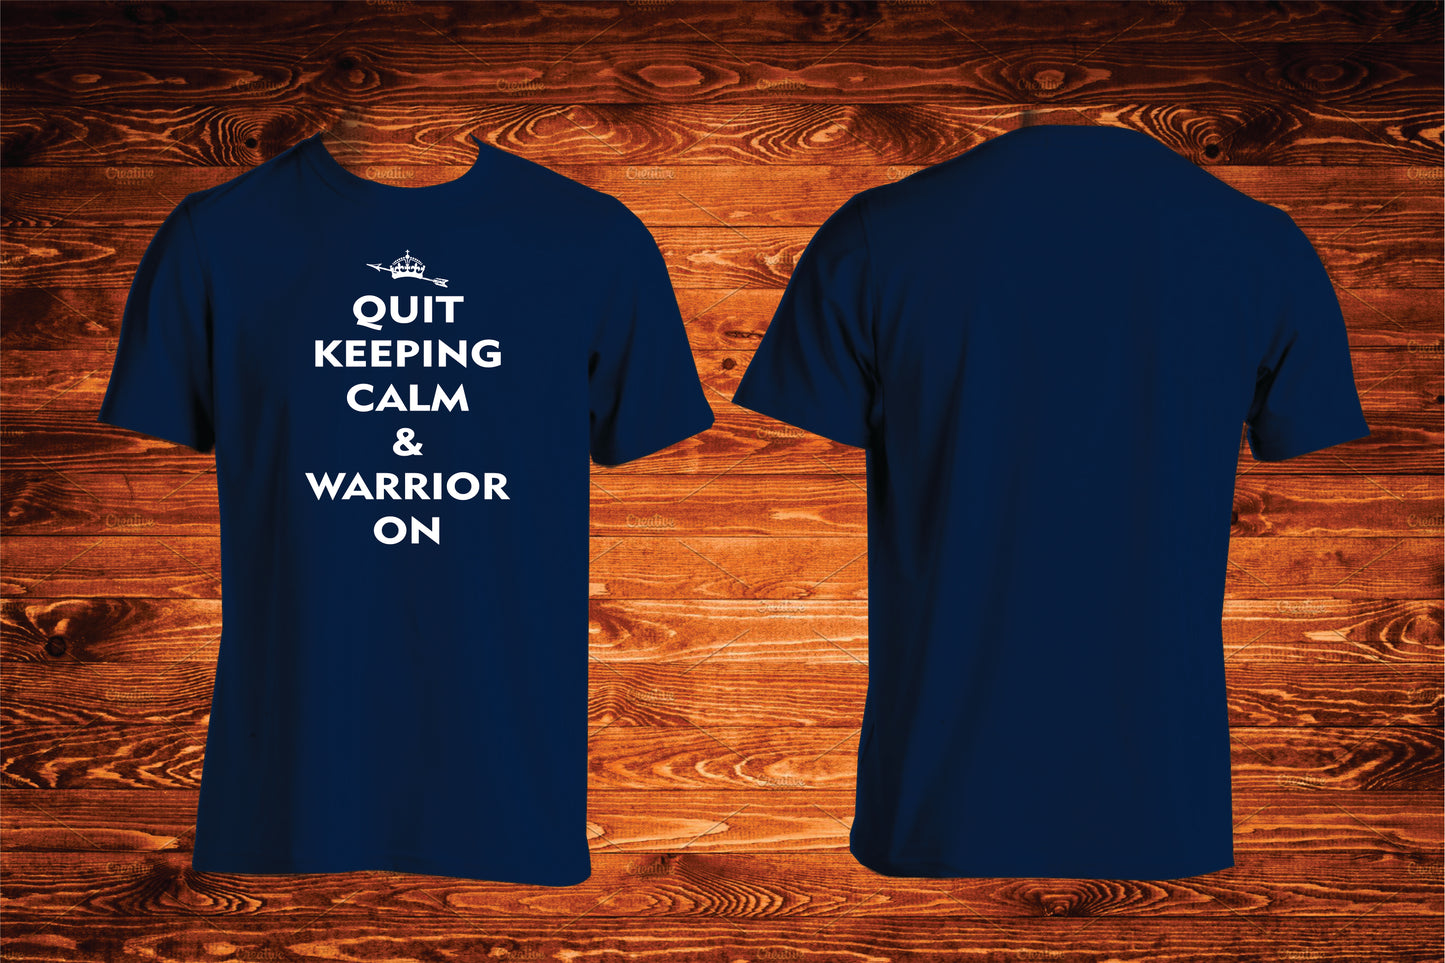 Quit Keeping Calm & Warrior On T-shirt Design by True Descendants Trading Company